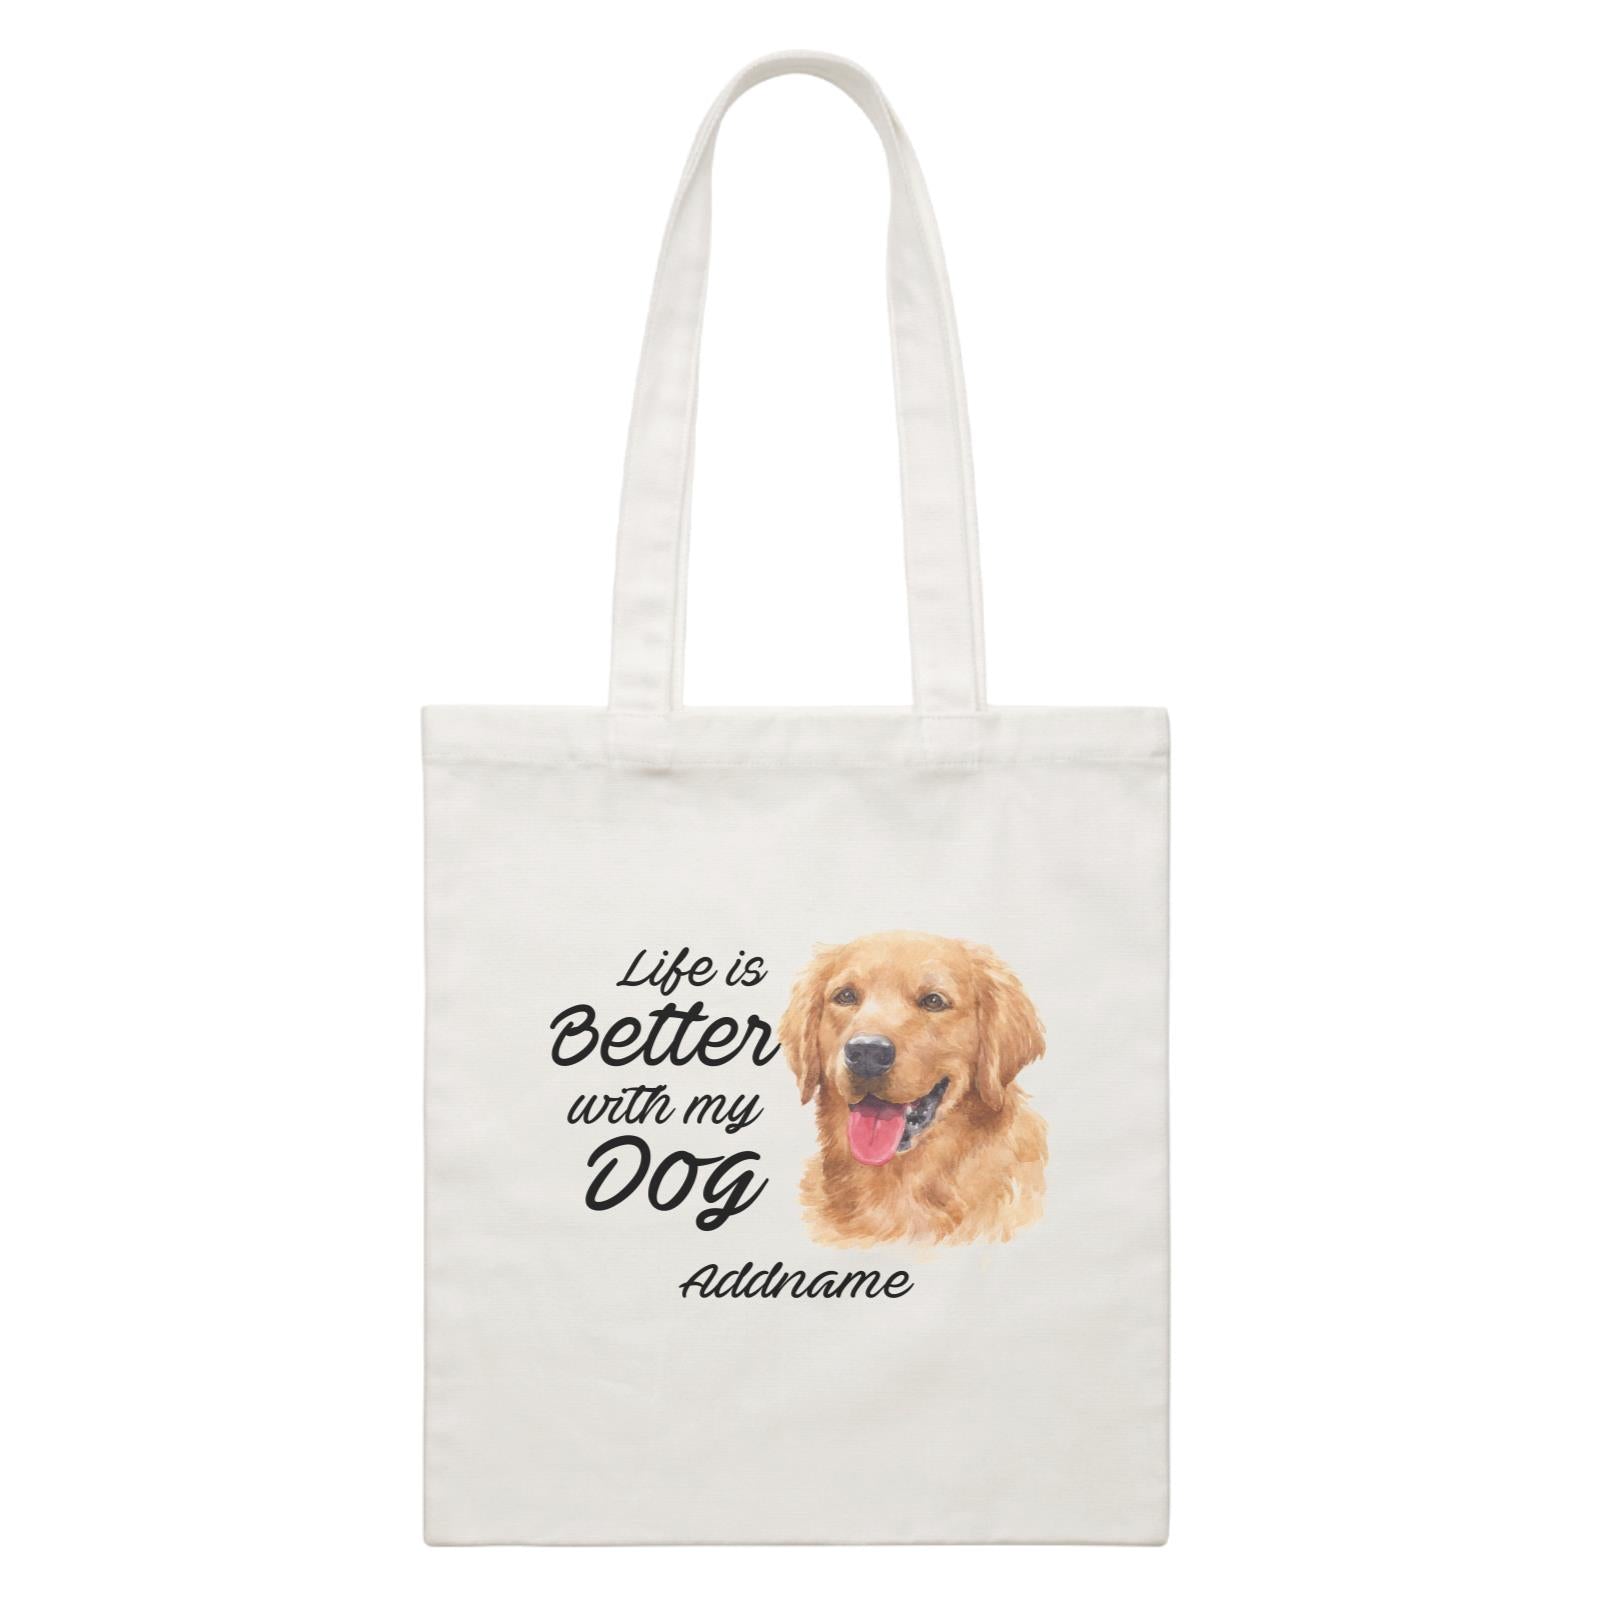 Watercolor Life is Better With My Dog Golden Retriever Addname White Canvas Bag